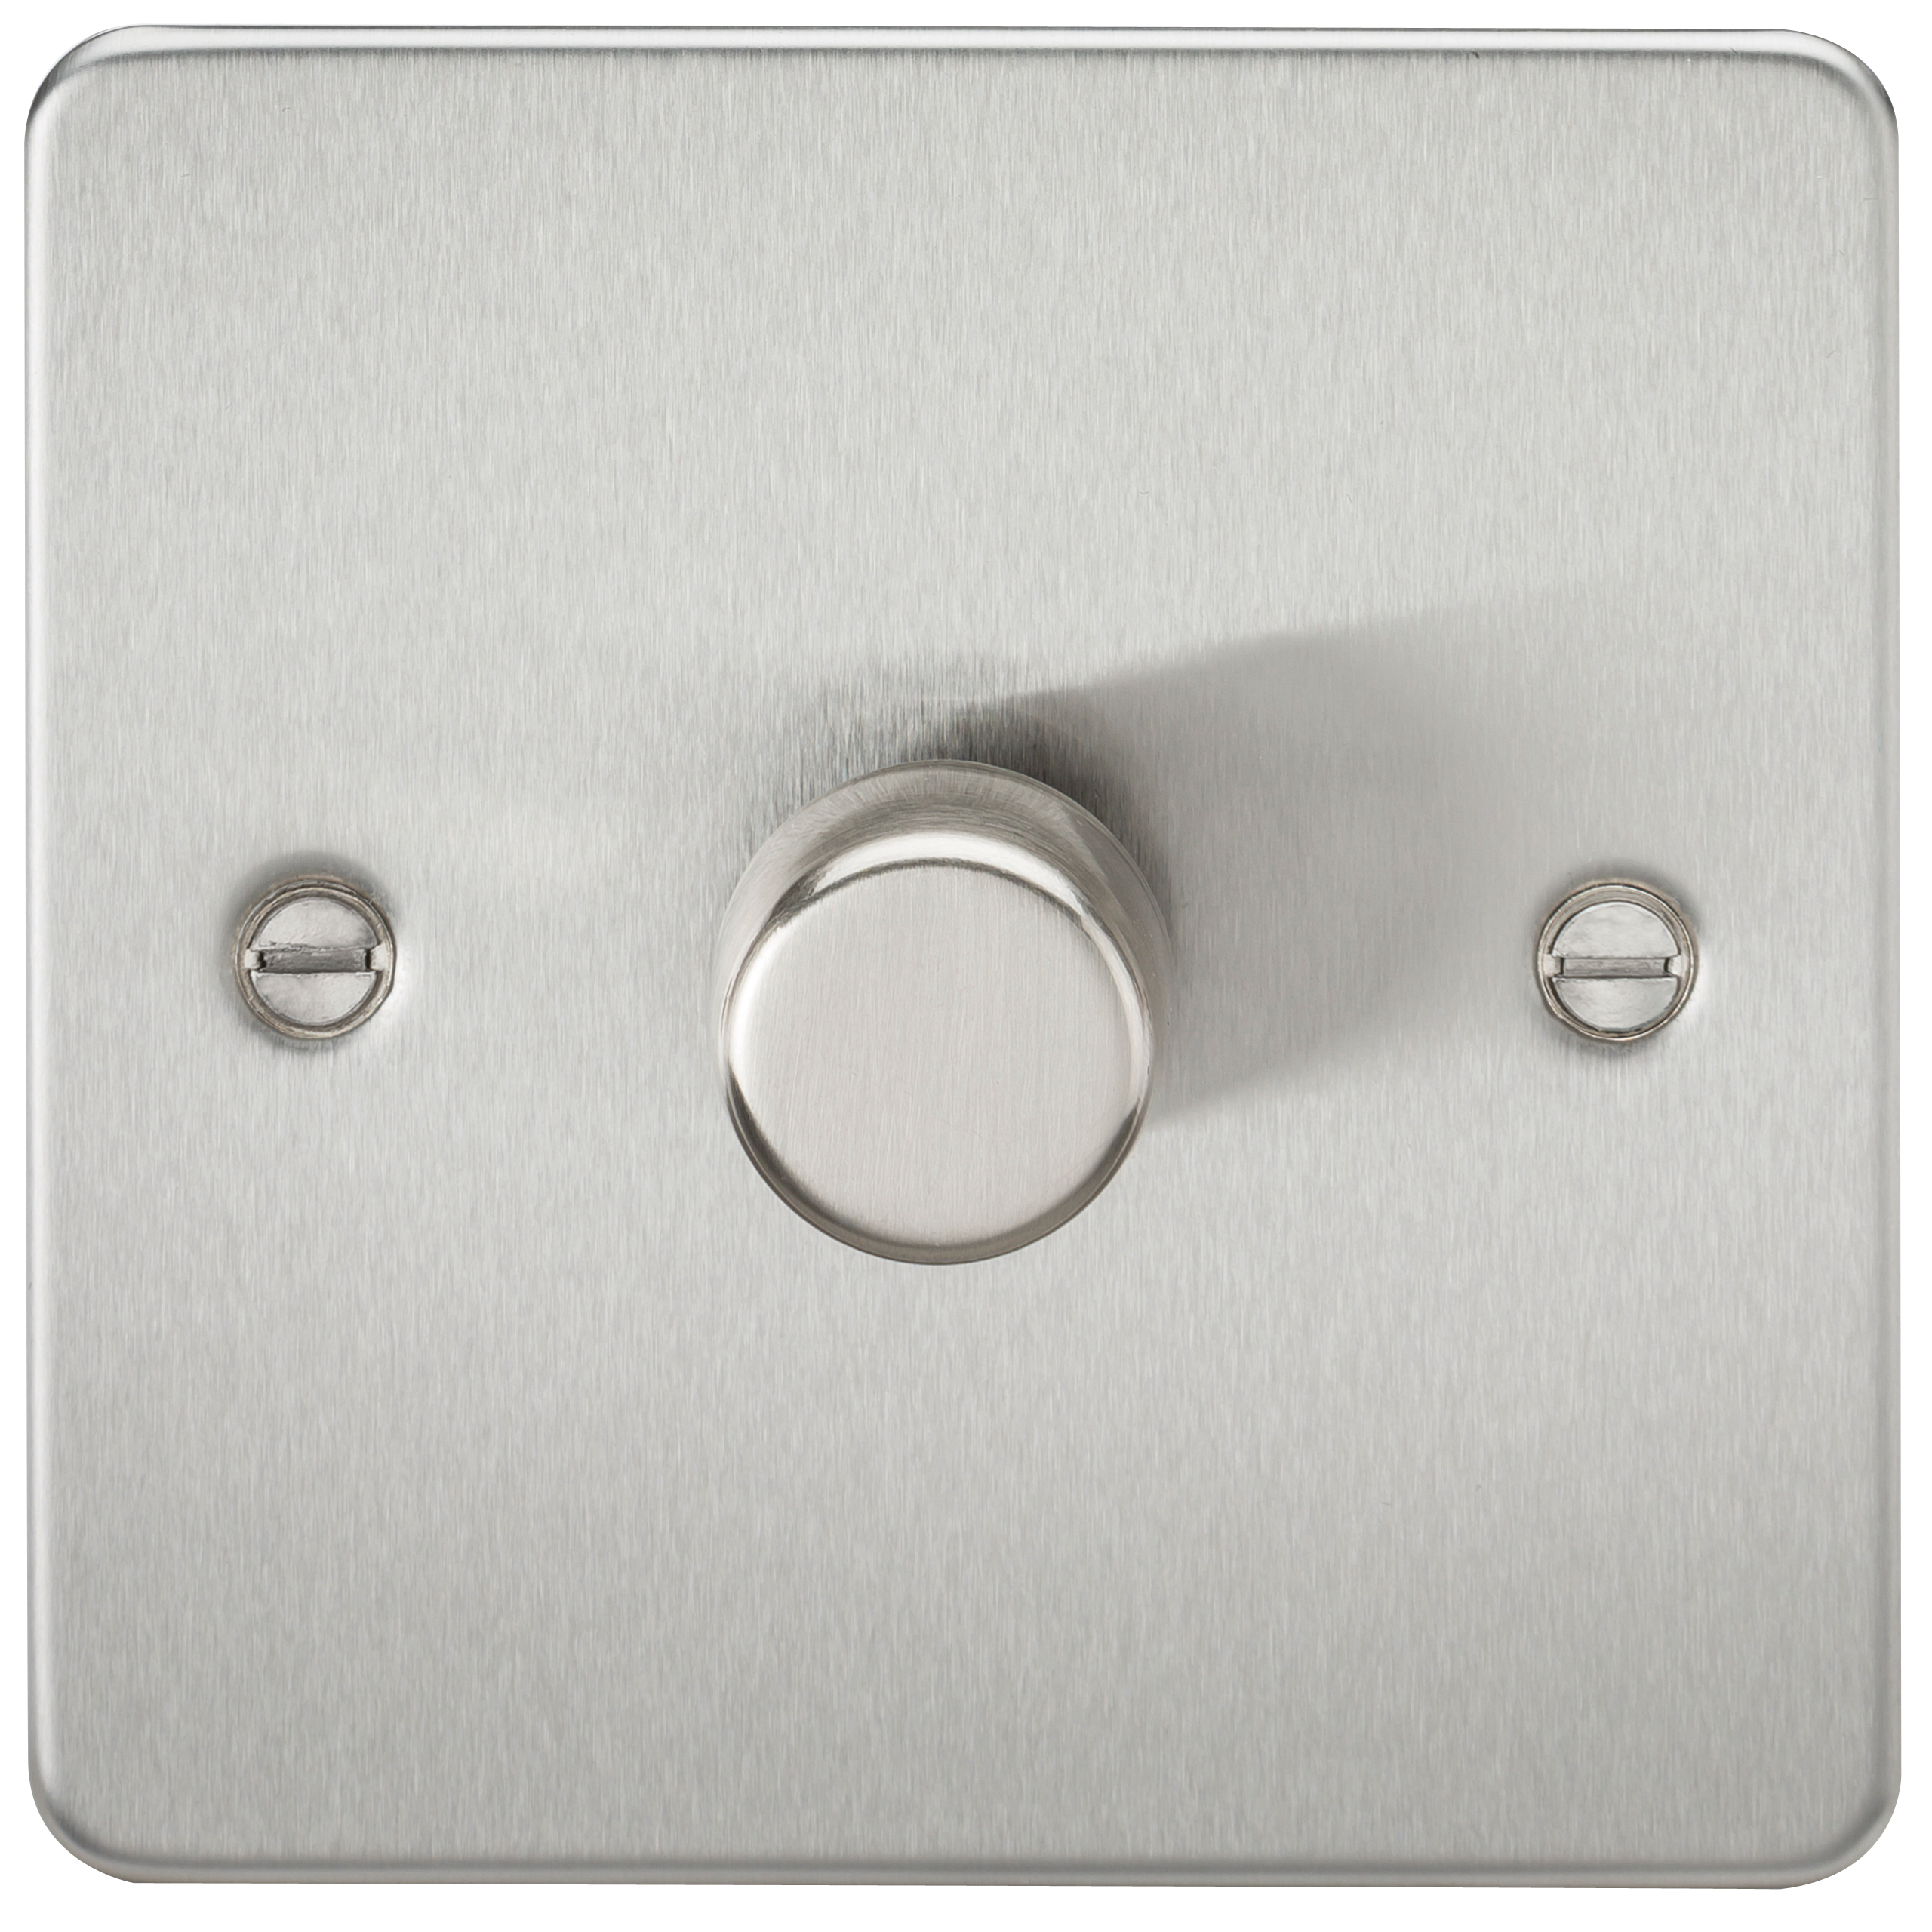 Flat Plate 1G 2 Way 40-400W Dimmer - Brushed Chrome - FP2171BC 